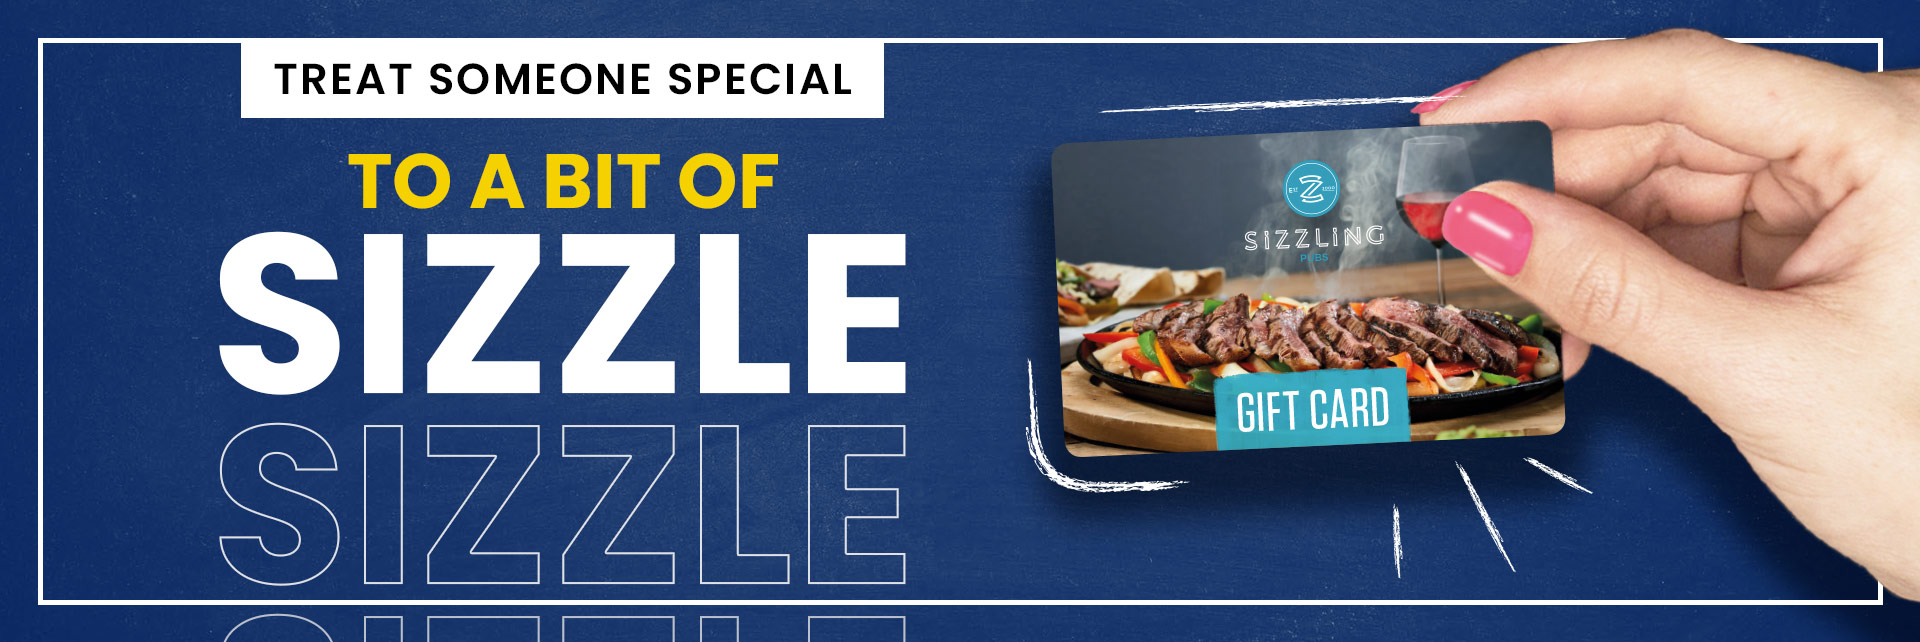 Sizzling Pubs Gift Card at The County in South Shields